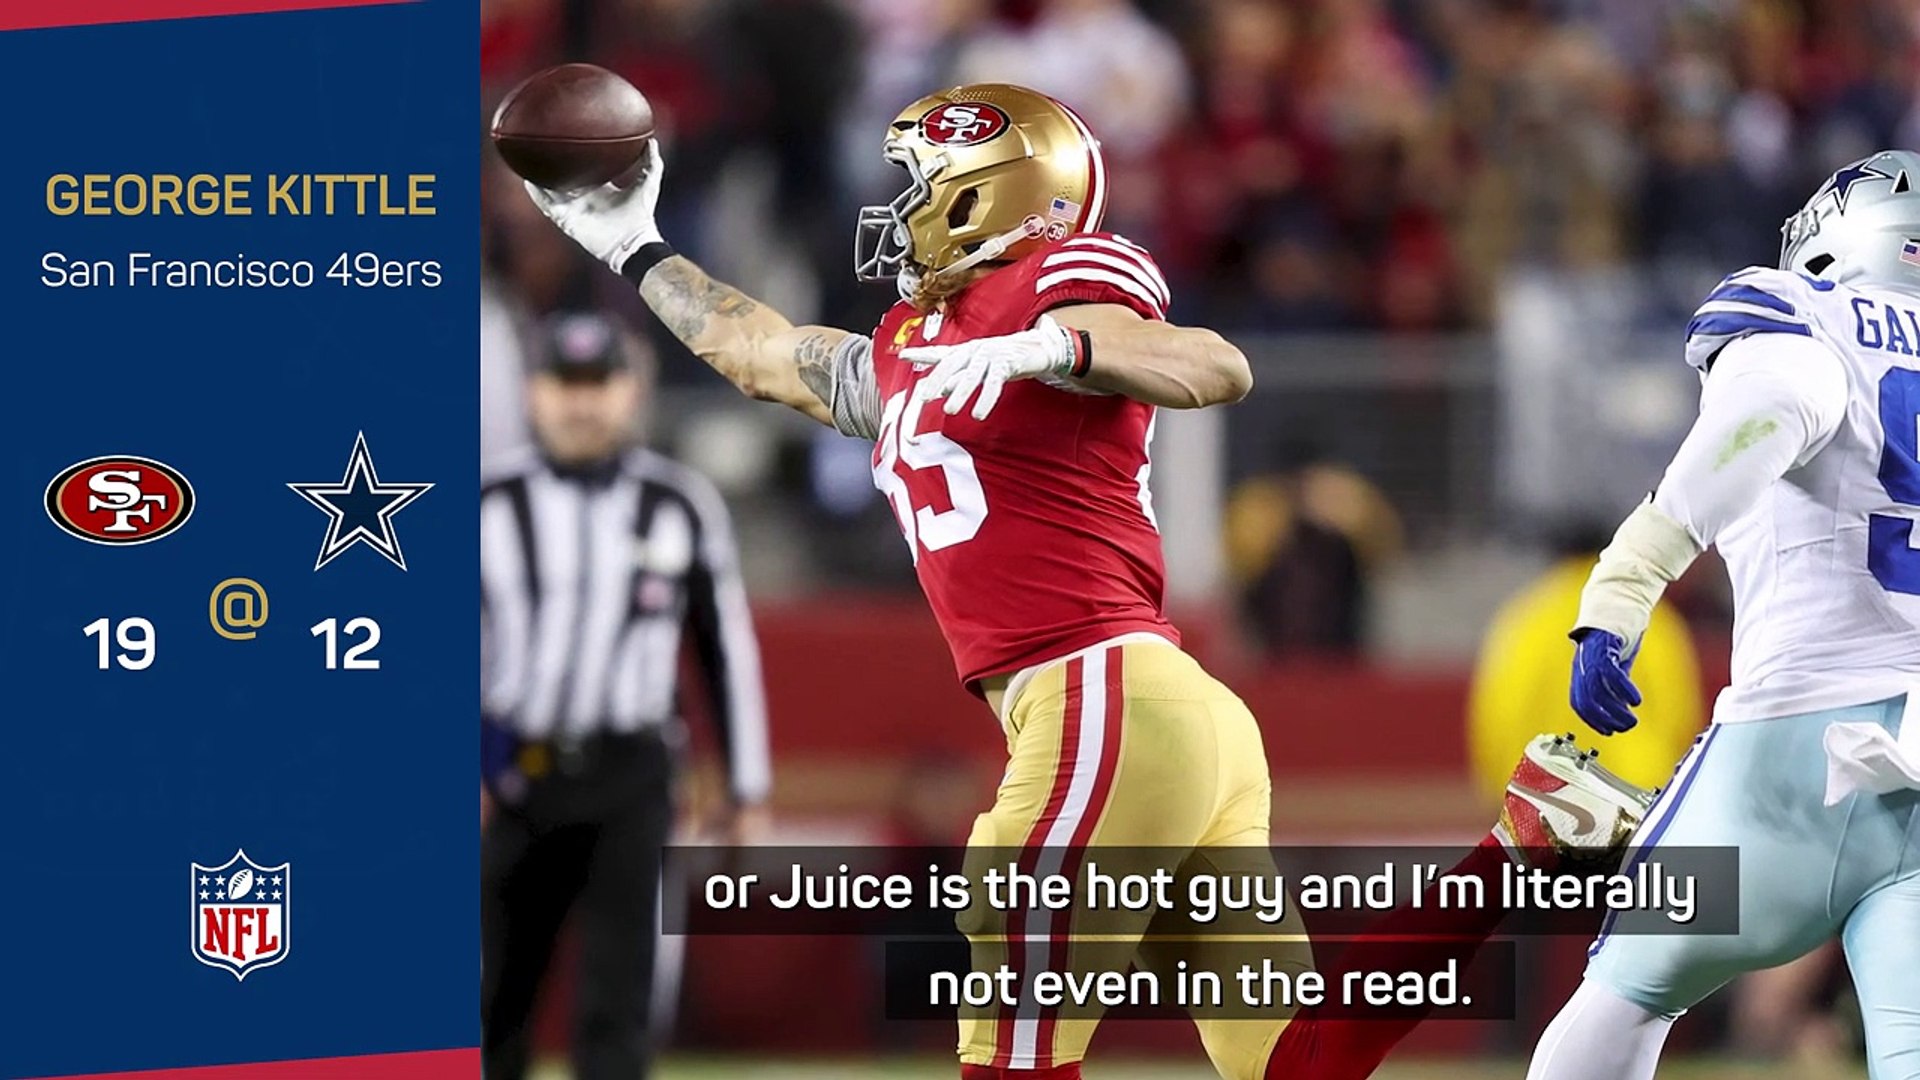 George Kittle player prop bets for 49ers vs. Cowboys, NFL Playoffs